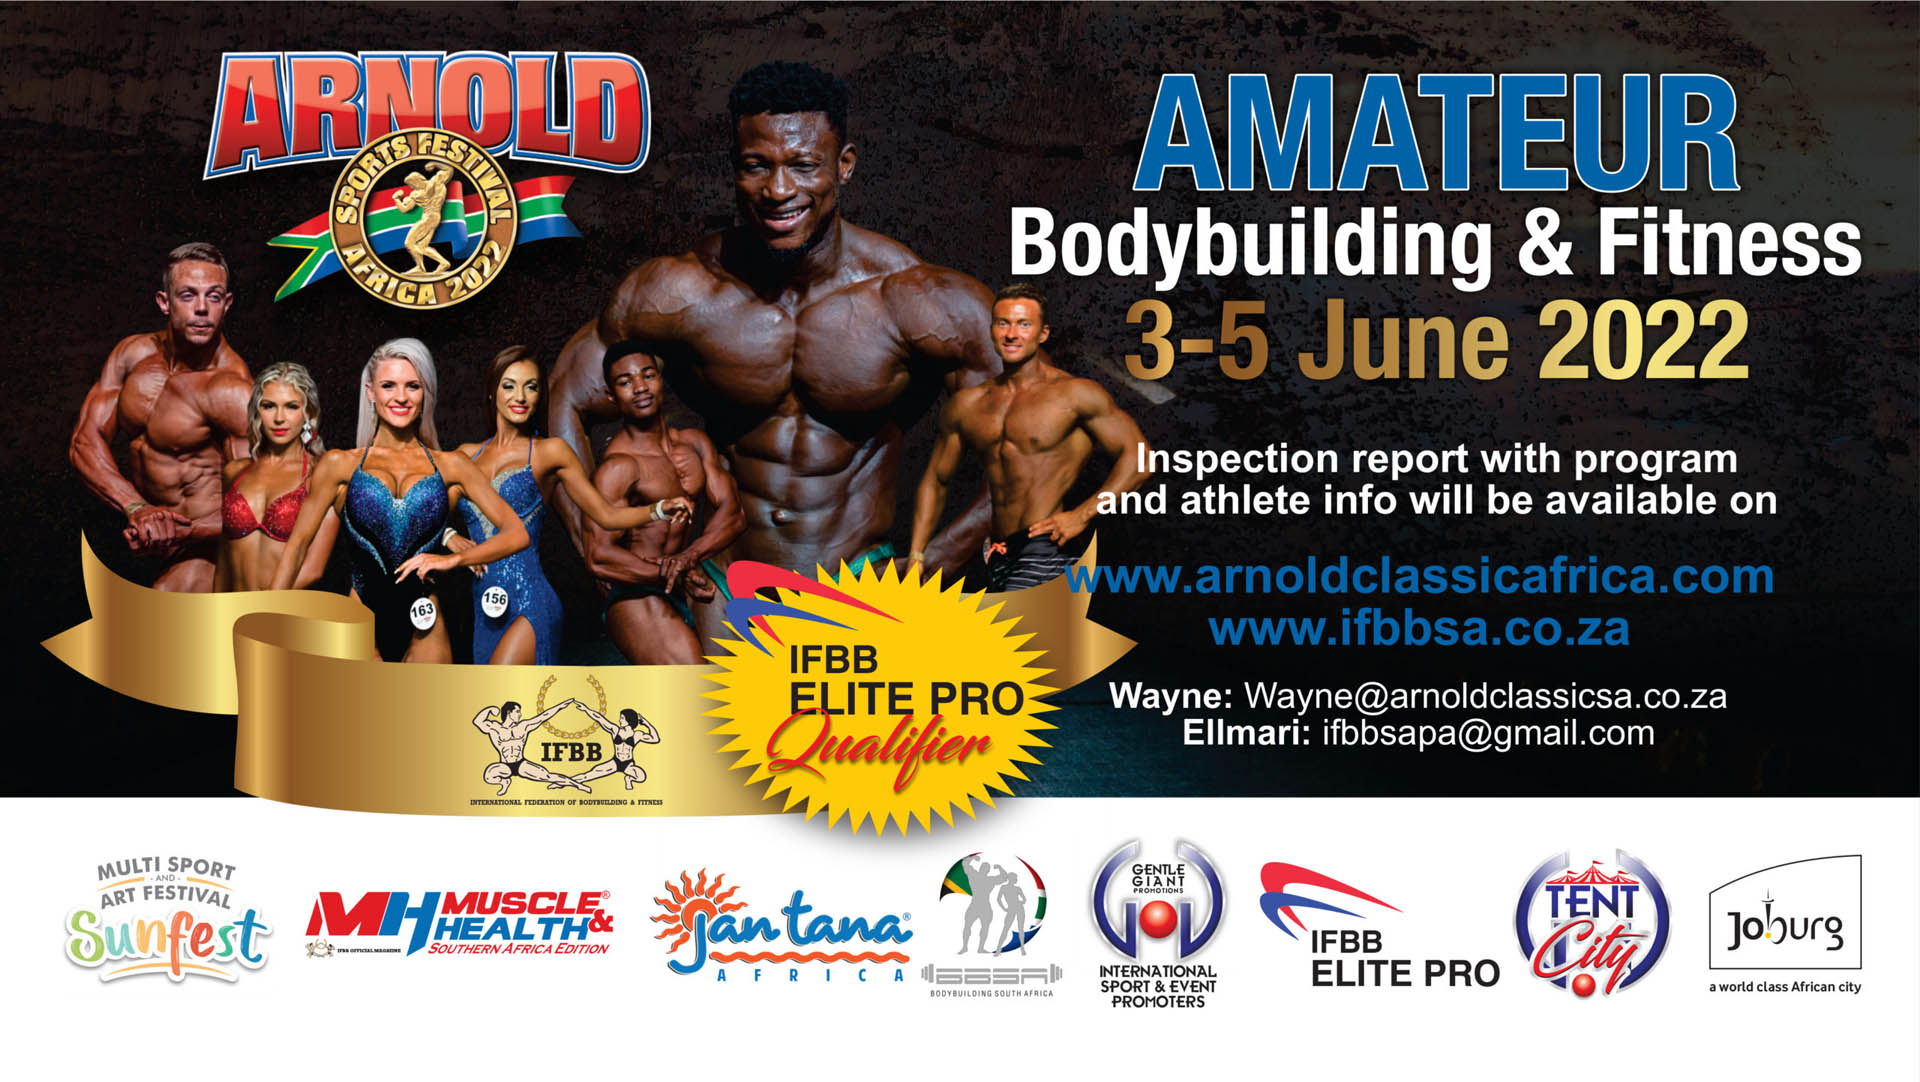 ARNOLD SPORTS FESTIVAL AFRICA